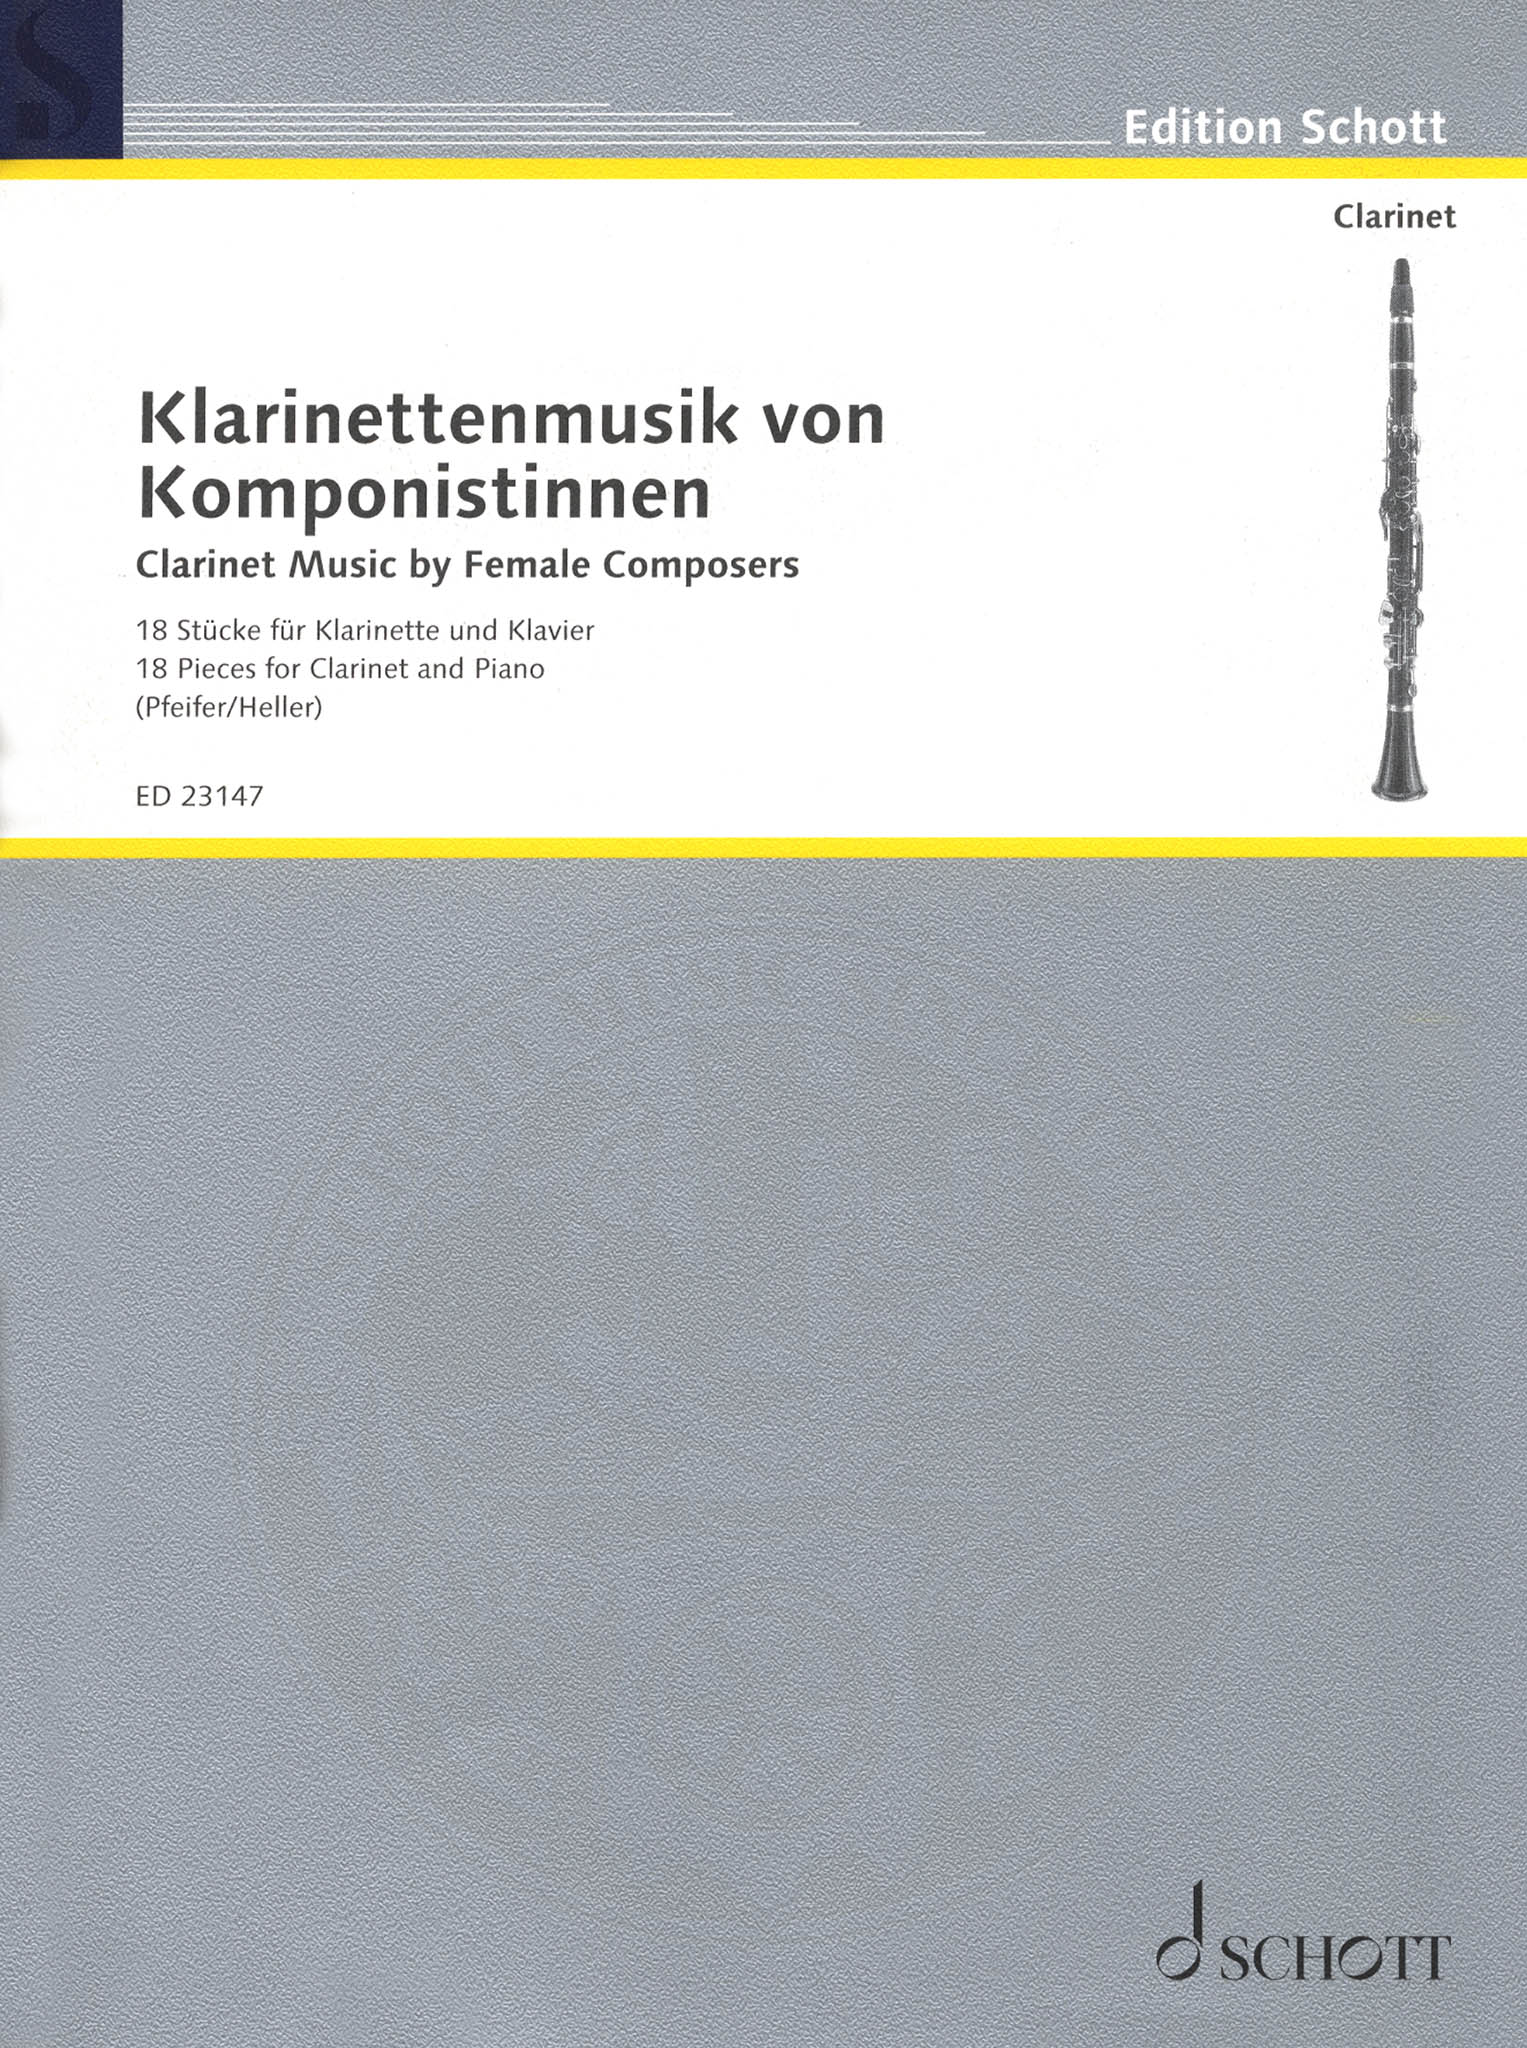 Clarinet Music by Female Composers Schott Collection cover